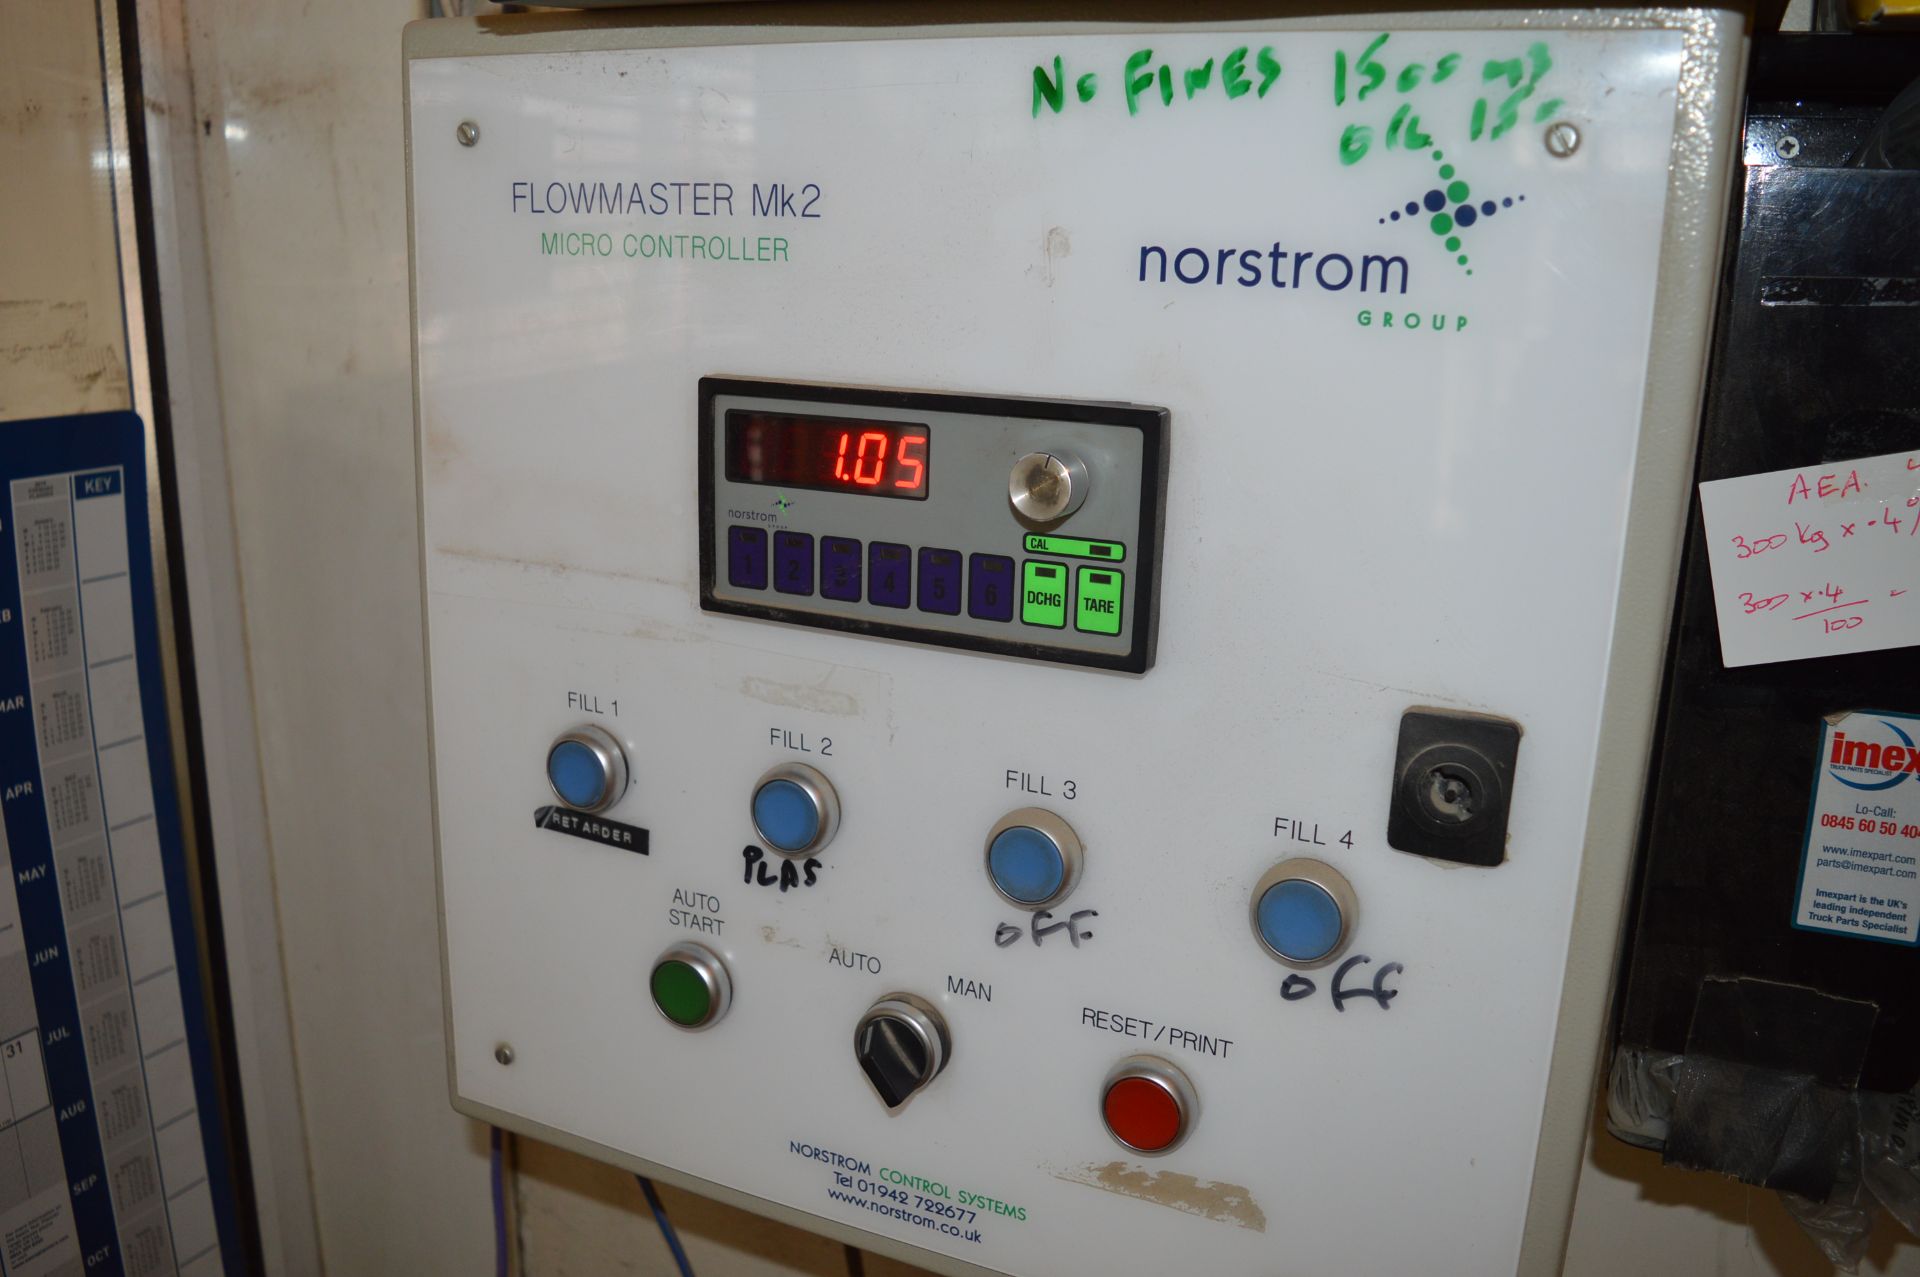 4 Chamber dosing / additives plant with Norstrom Group Flow Master MK2 process controller (Please